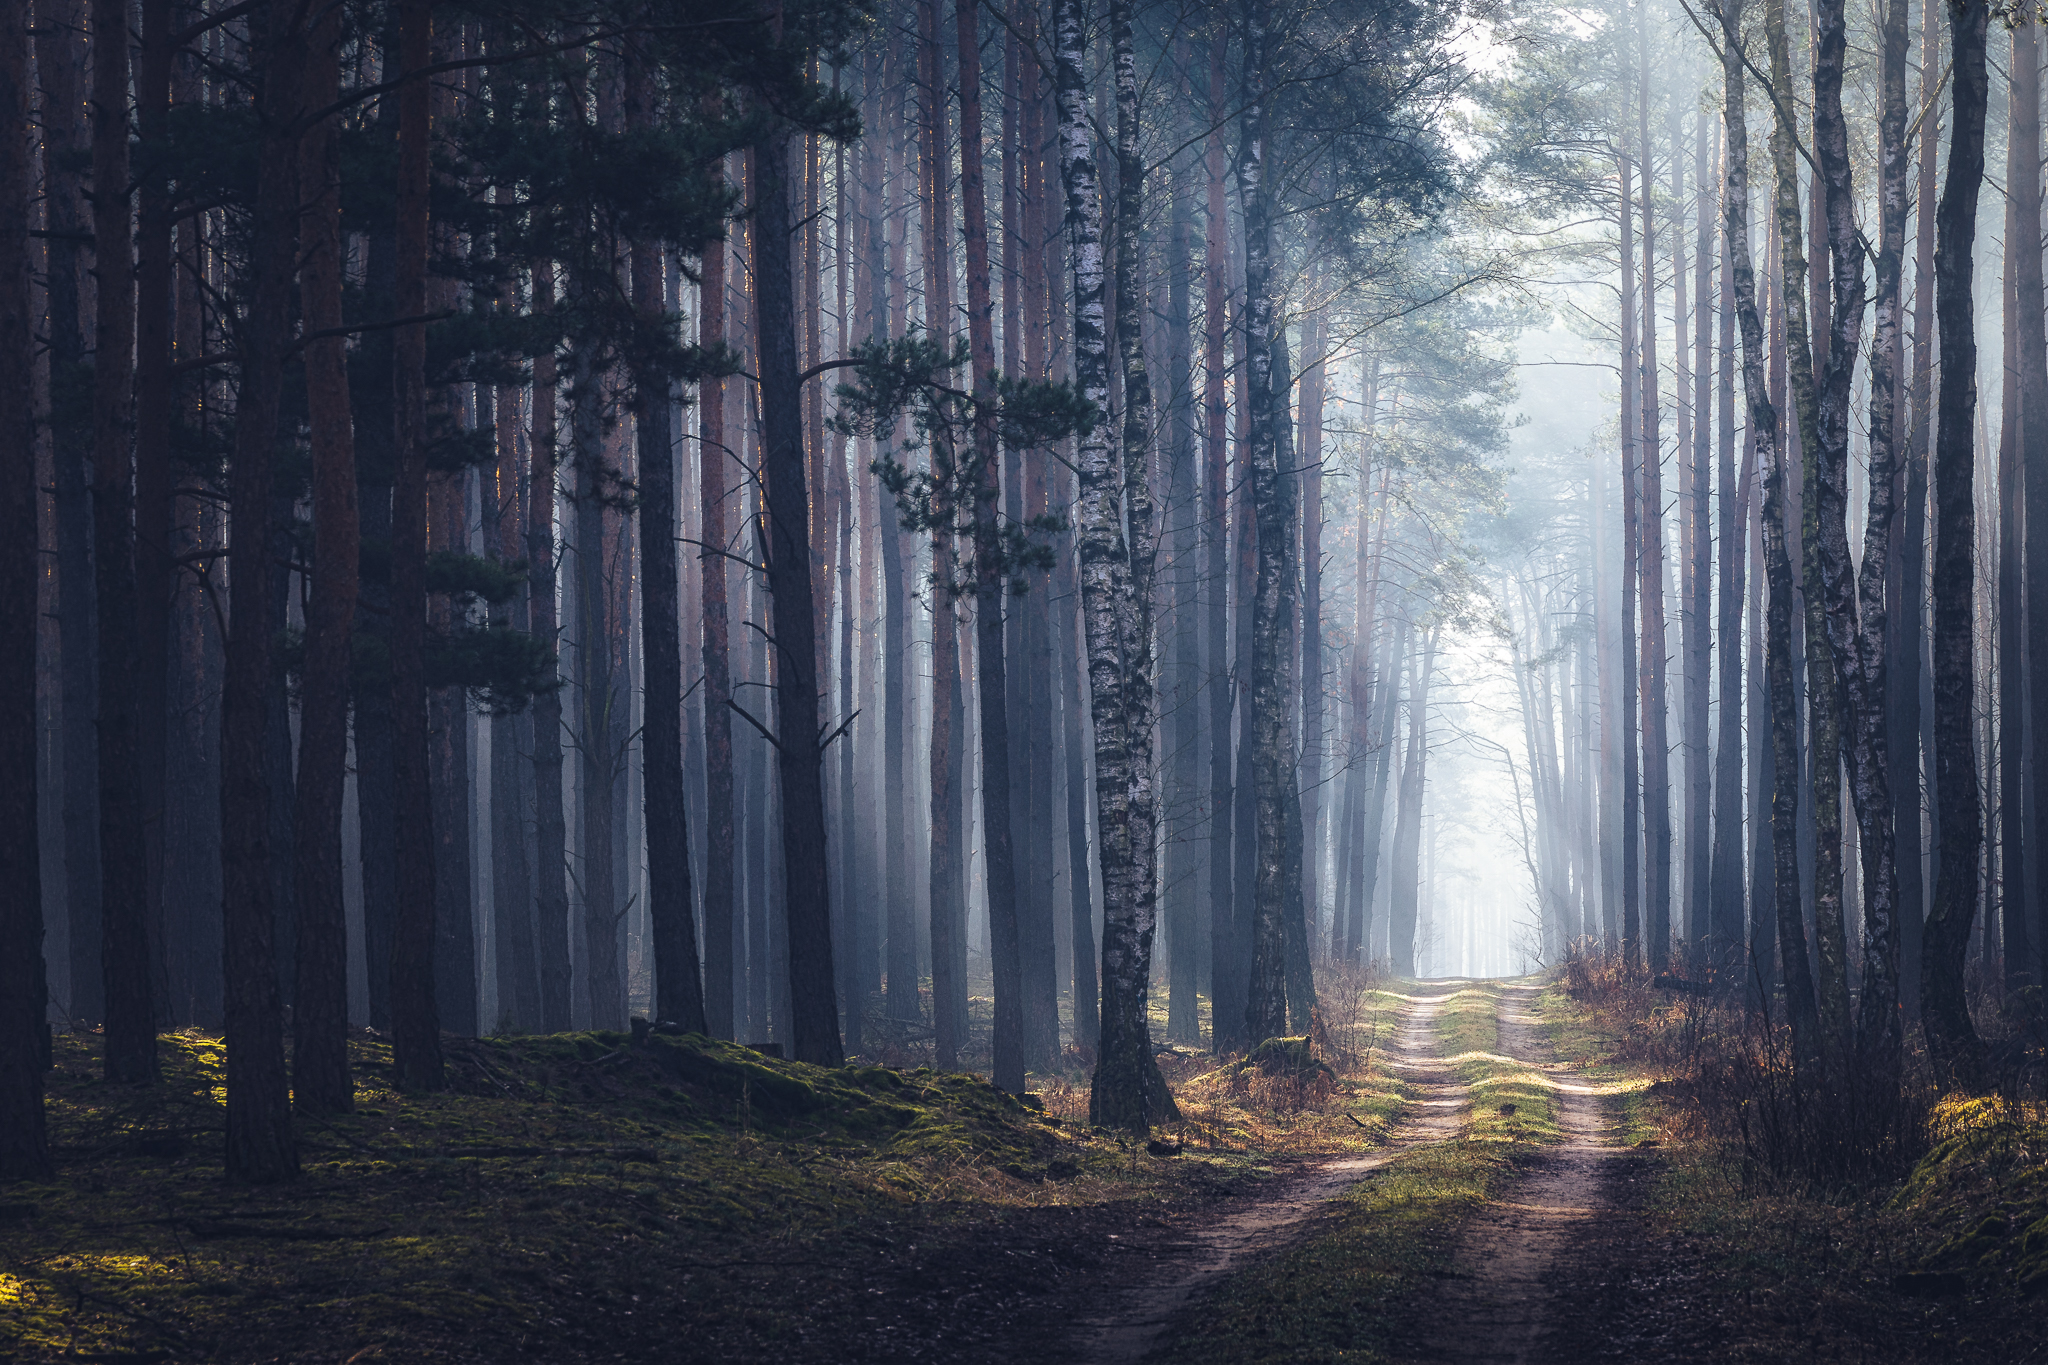 General 2048x1365 Michał Tomczak forest trees path nature outdoors photography dappled sunlight landscape